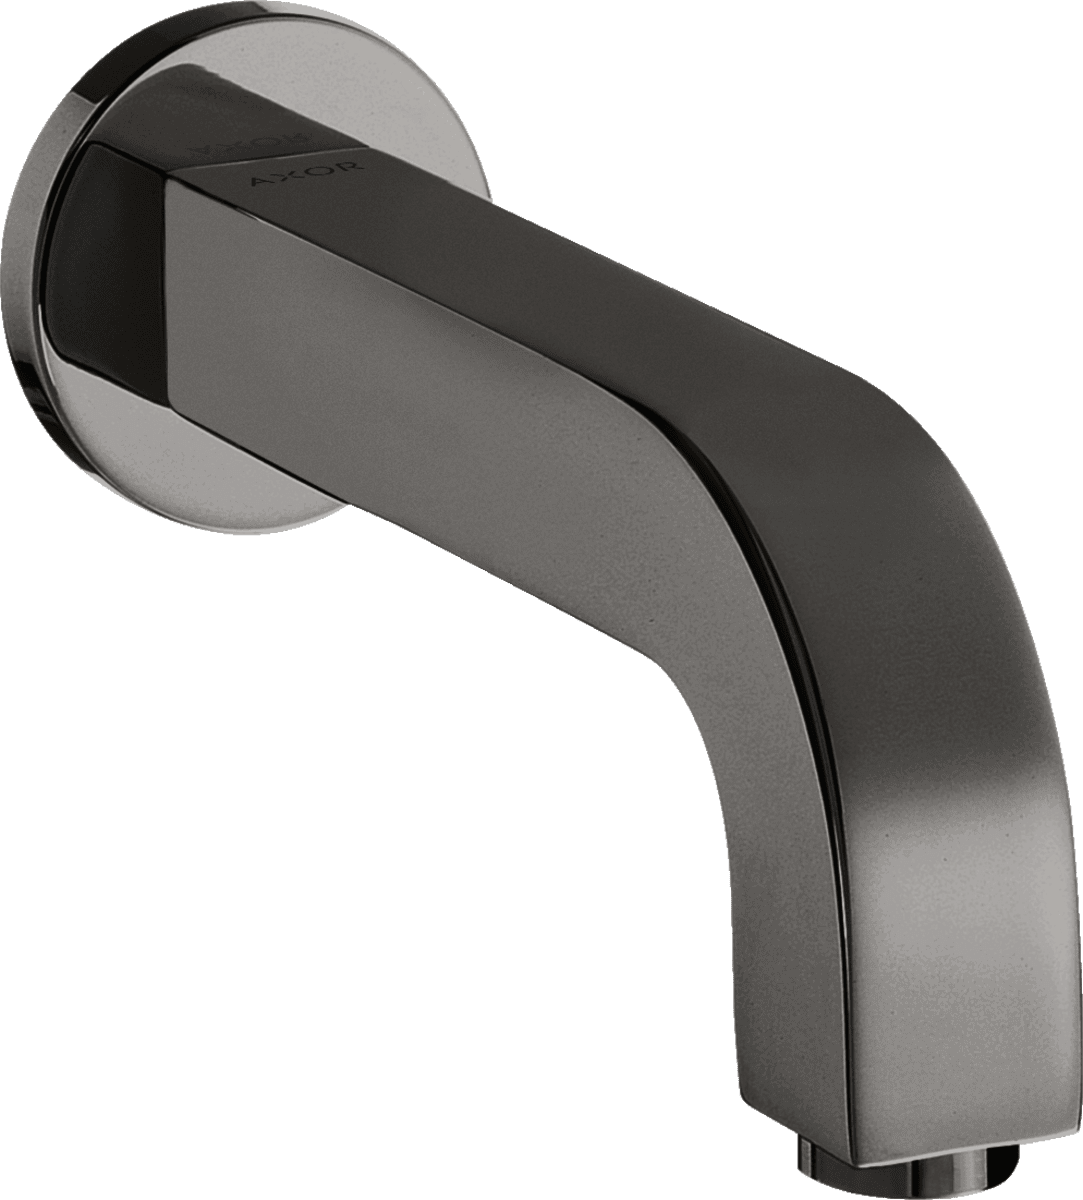 Picture of HANSGROHE AXOR Citterio Bath spout #39410330 - Polished Black Chrome